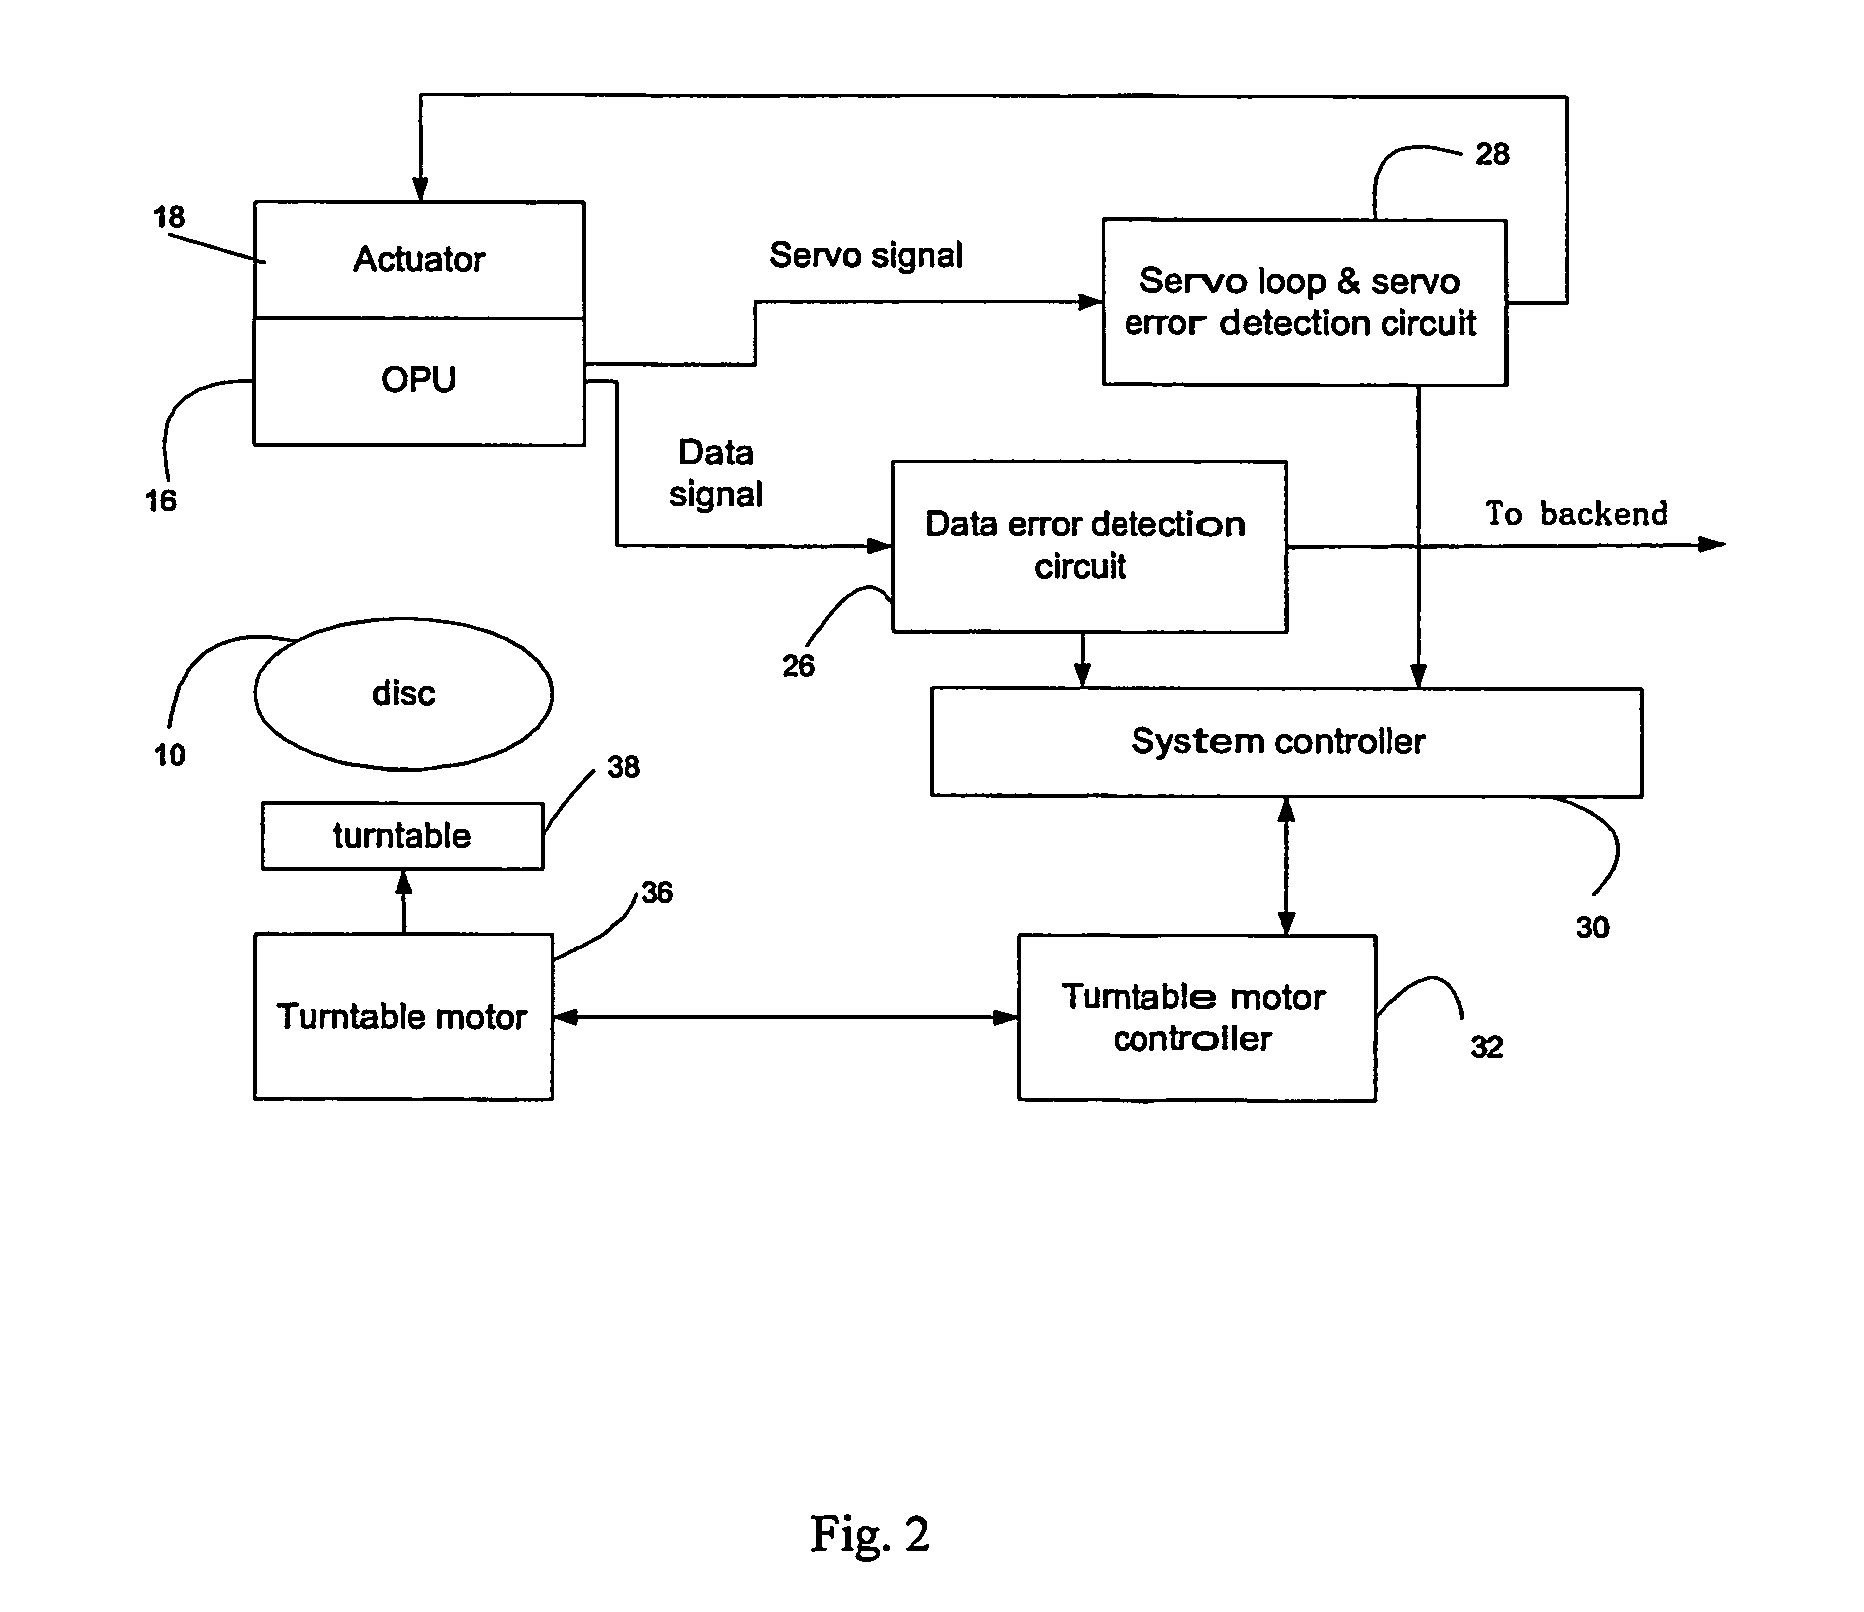 Method and System for Improving the Ability of Player/Recorder Systems to Read a Disc During the Startup Procedure